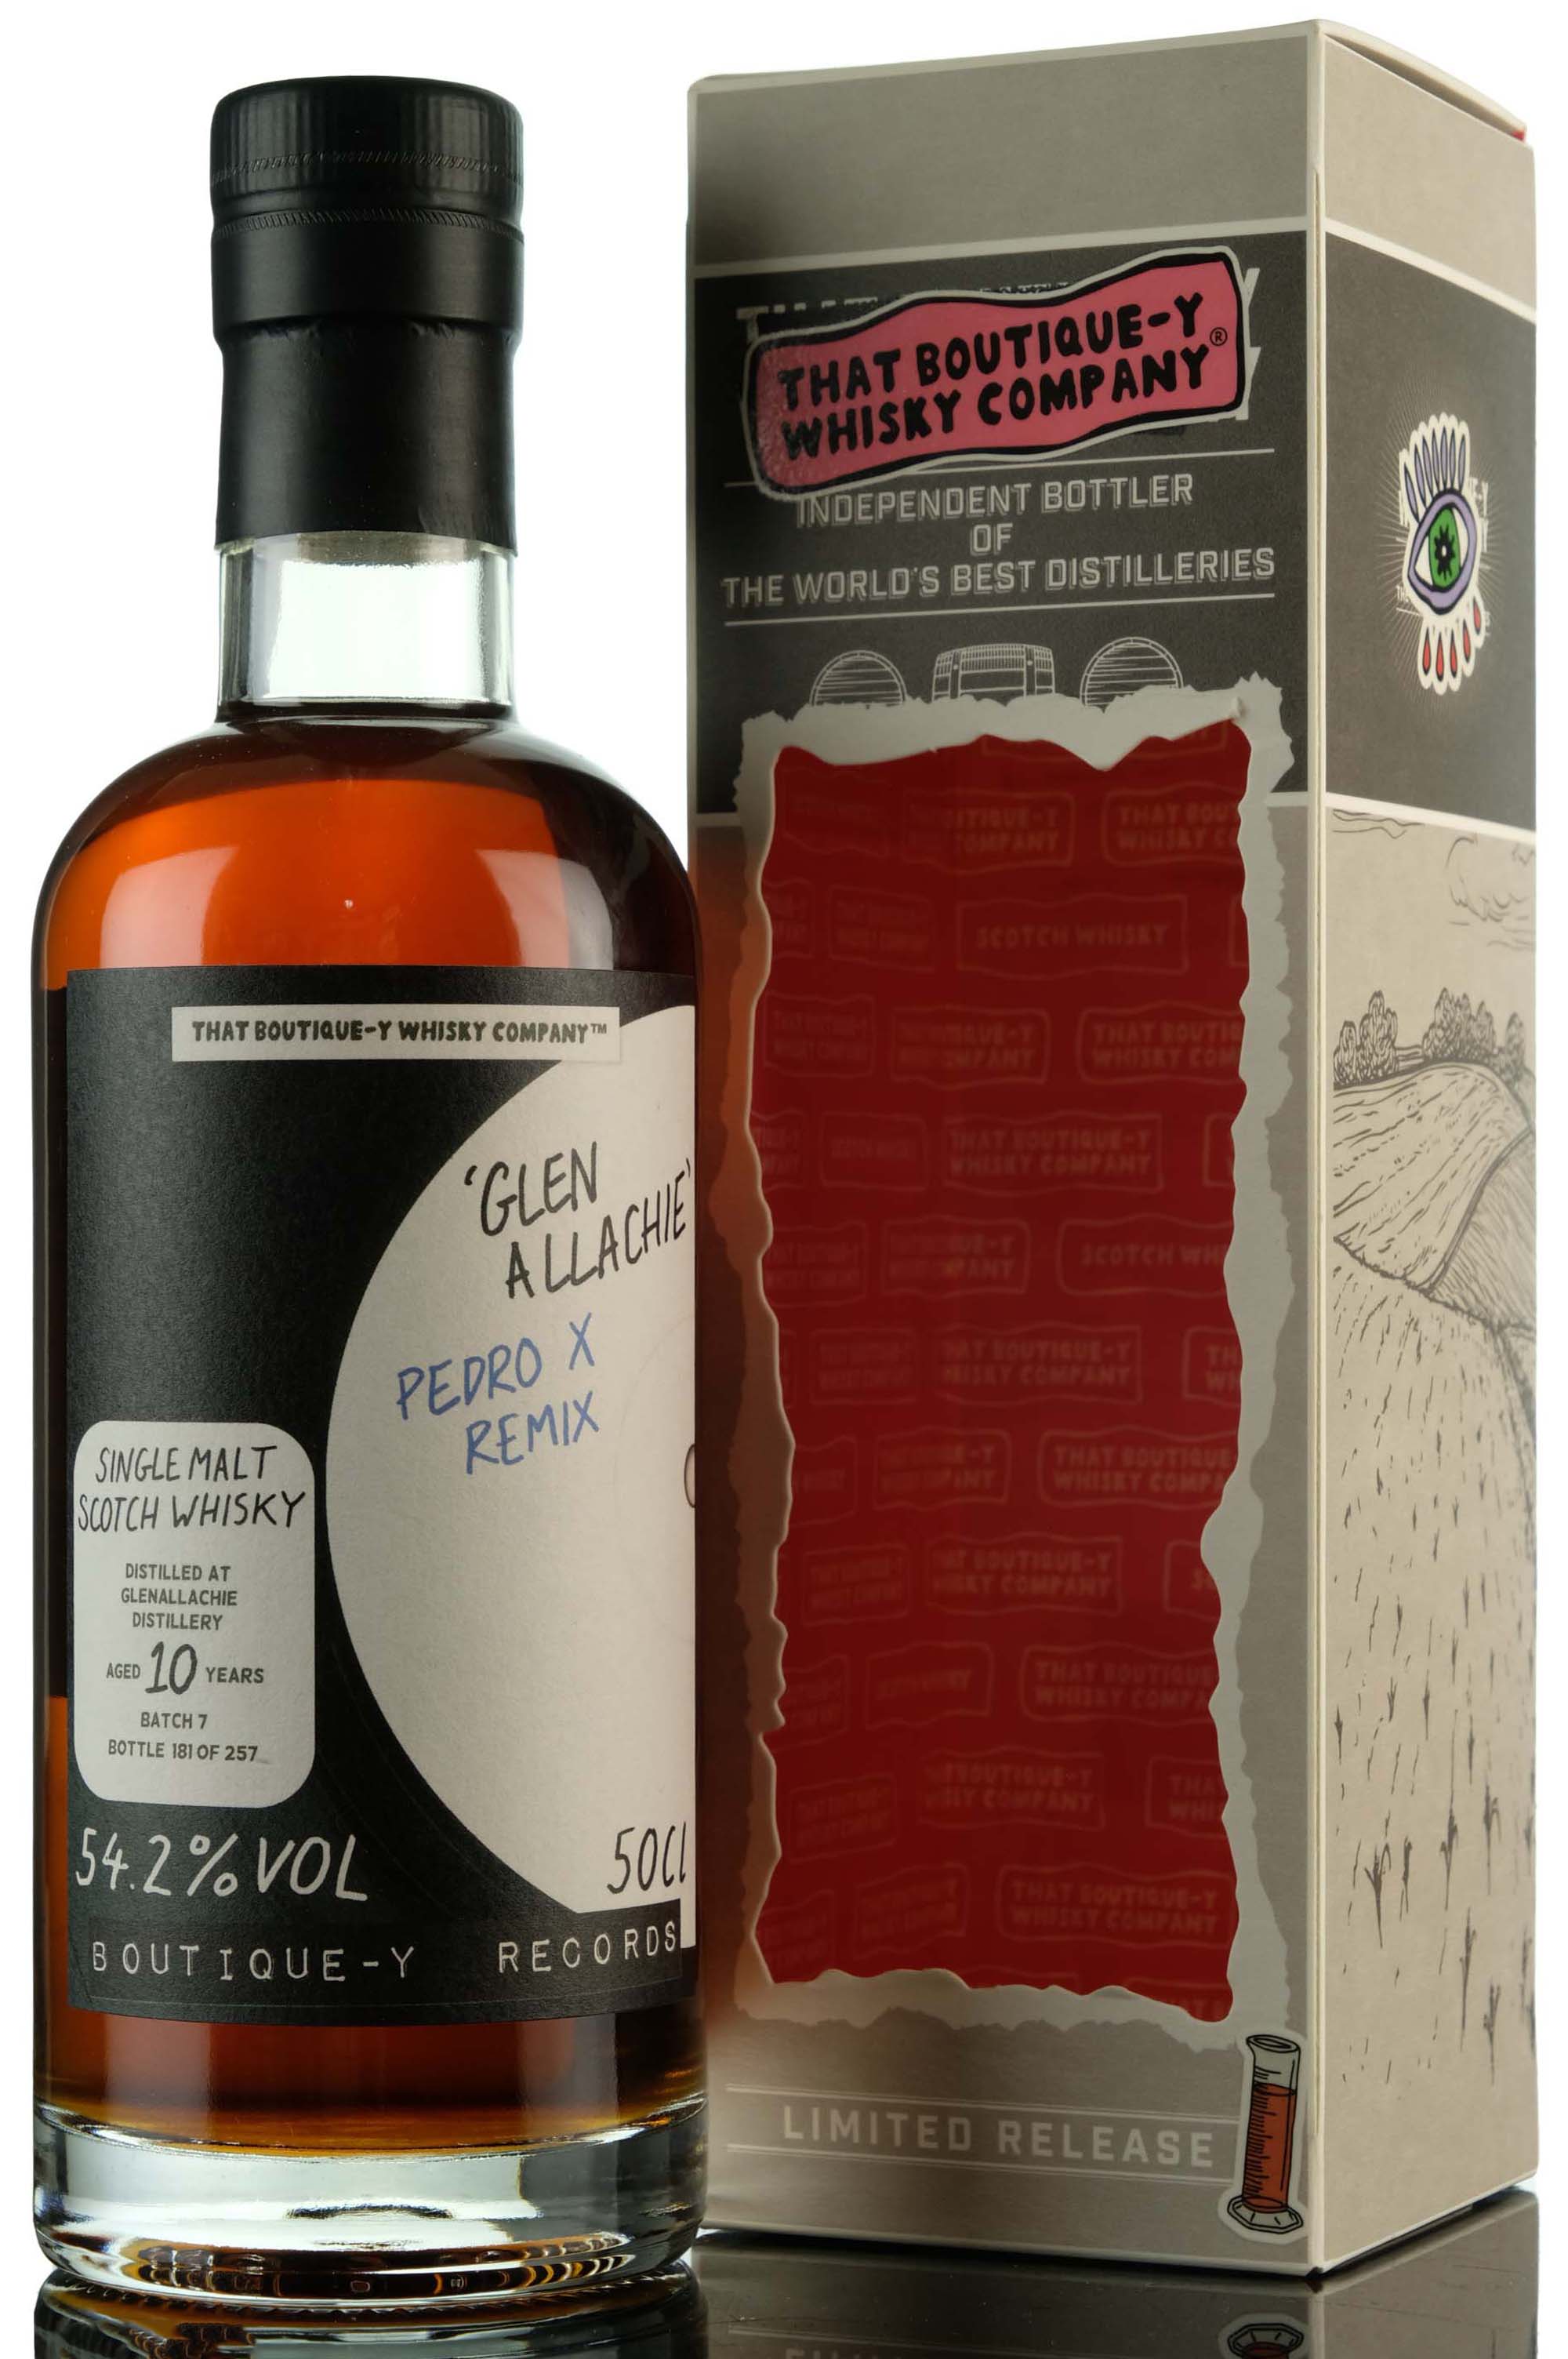 Glenallachie 2011 - 10 Year Old - That Boutique-y Whisky Company - Batch 7 - 2021 Release